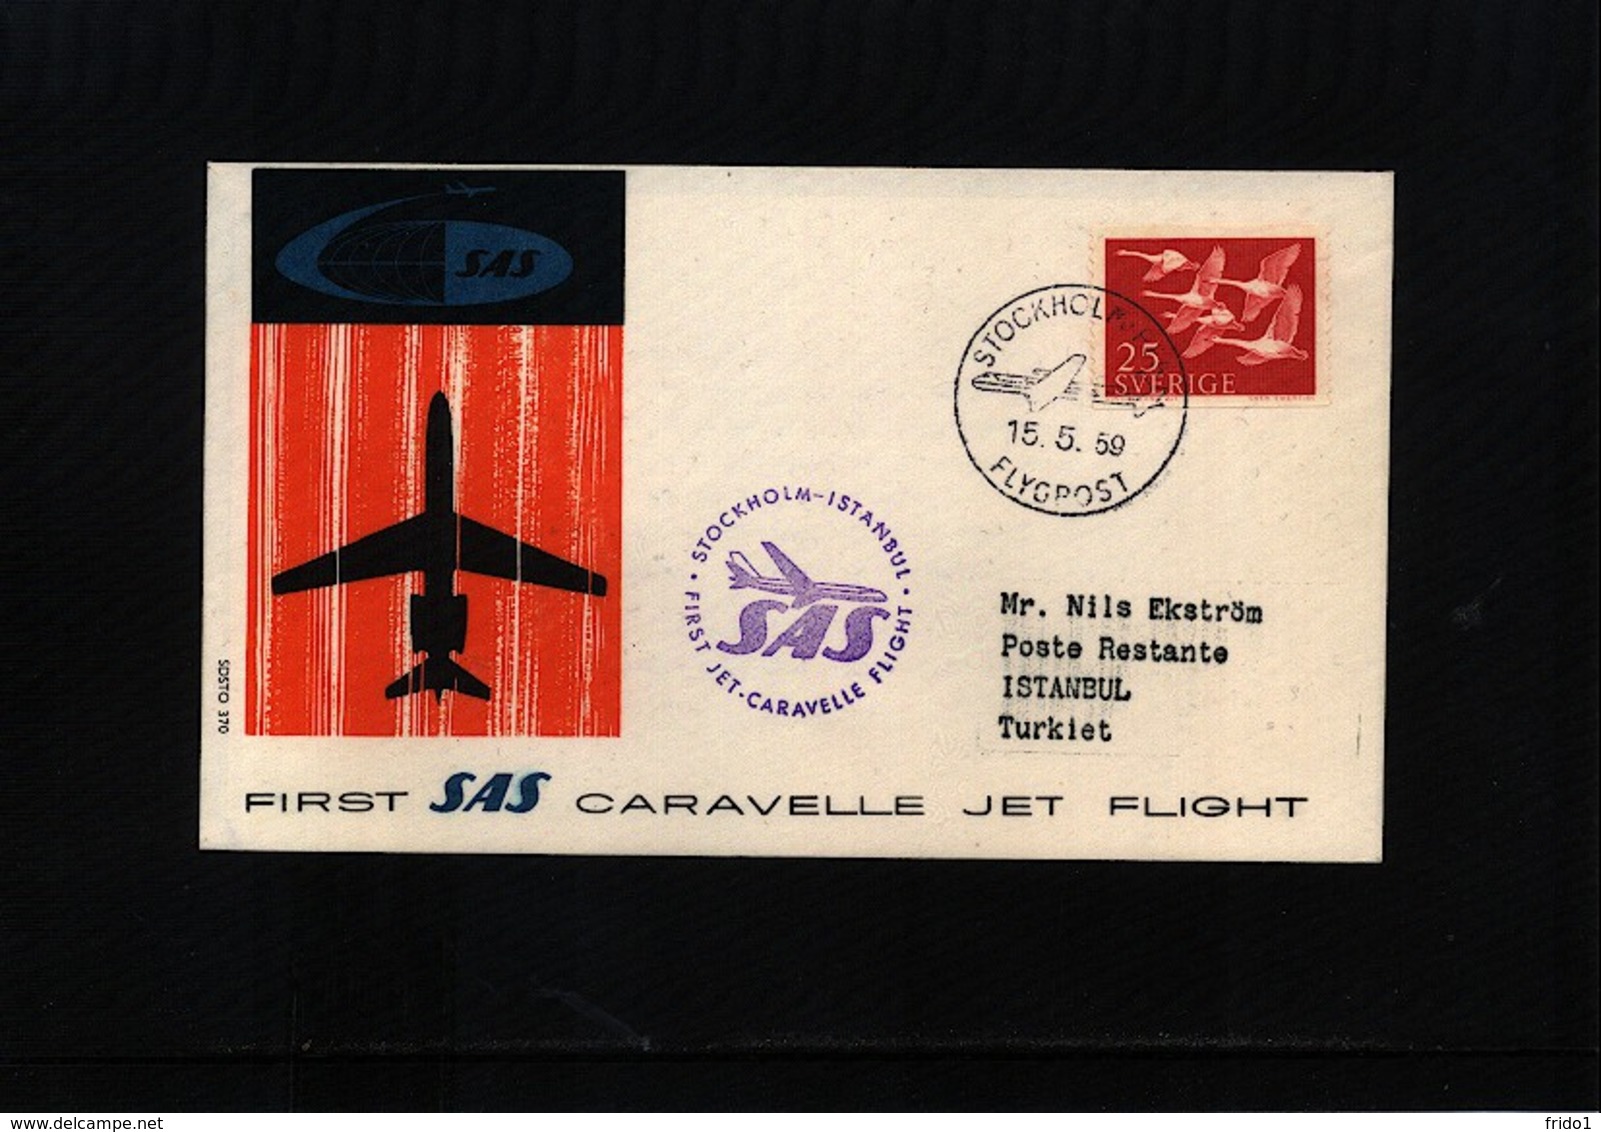 Sweden 1959 SAS First Flight Stockholm - Istanbul - Covers & Documents